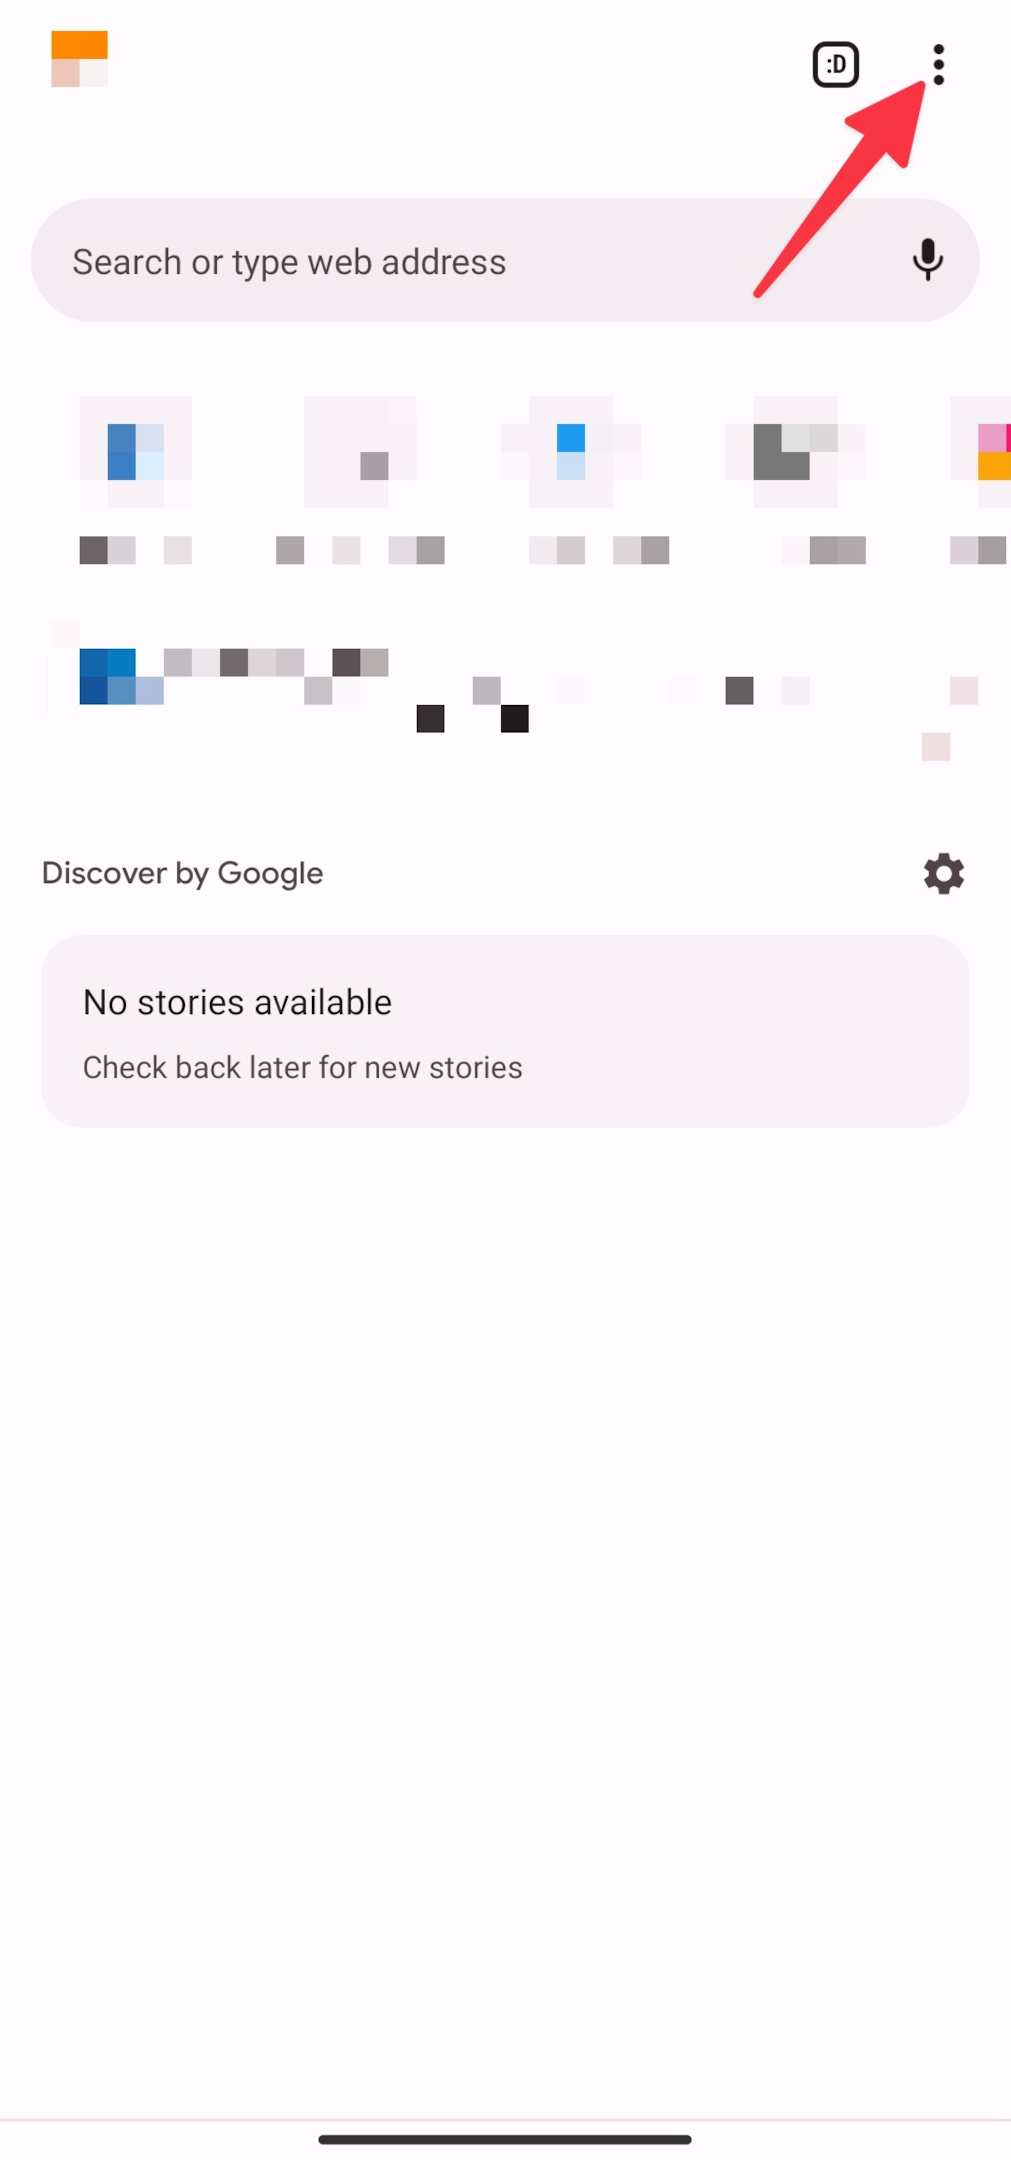 Remote.tools shows how to clear Google search history on an Android device. Tap on three dot menu in top right on Google Chrome app for Android